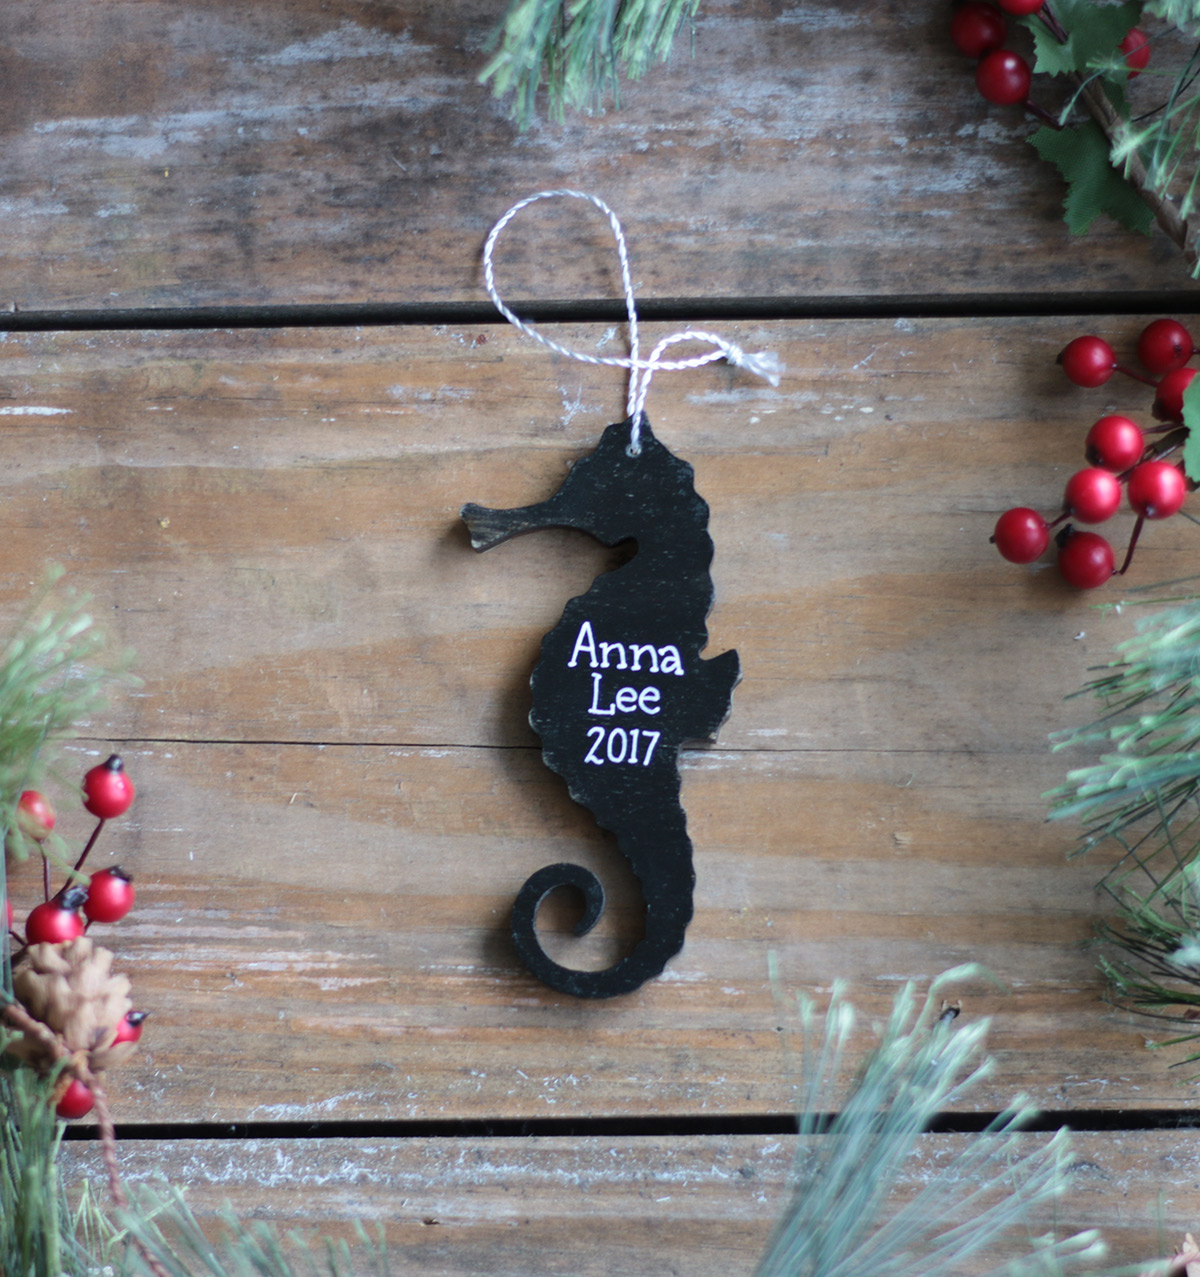 Seahorse Ceramic Ornament Cookie Cutter Handmade Rustic Lace-imprinted Christmas and Decoration